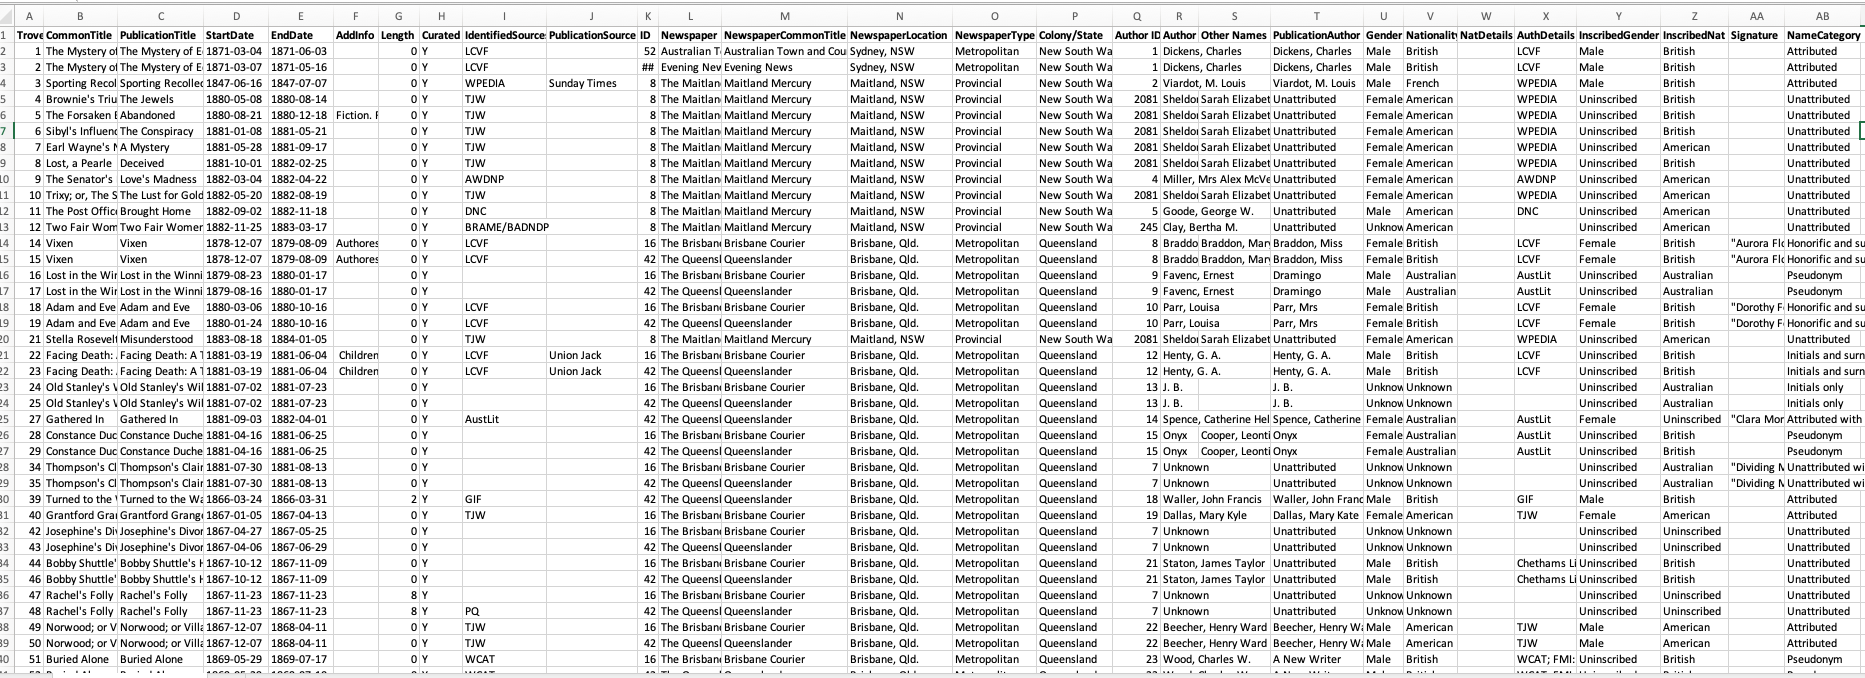 Large spreadsheet of Bode's metadata. Includes information from Australian newspapers, such as date, title, location, publisher, and author, among others.